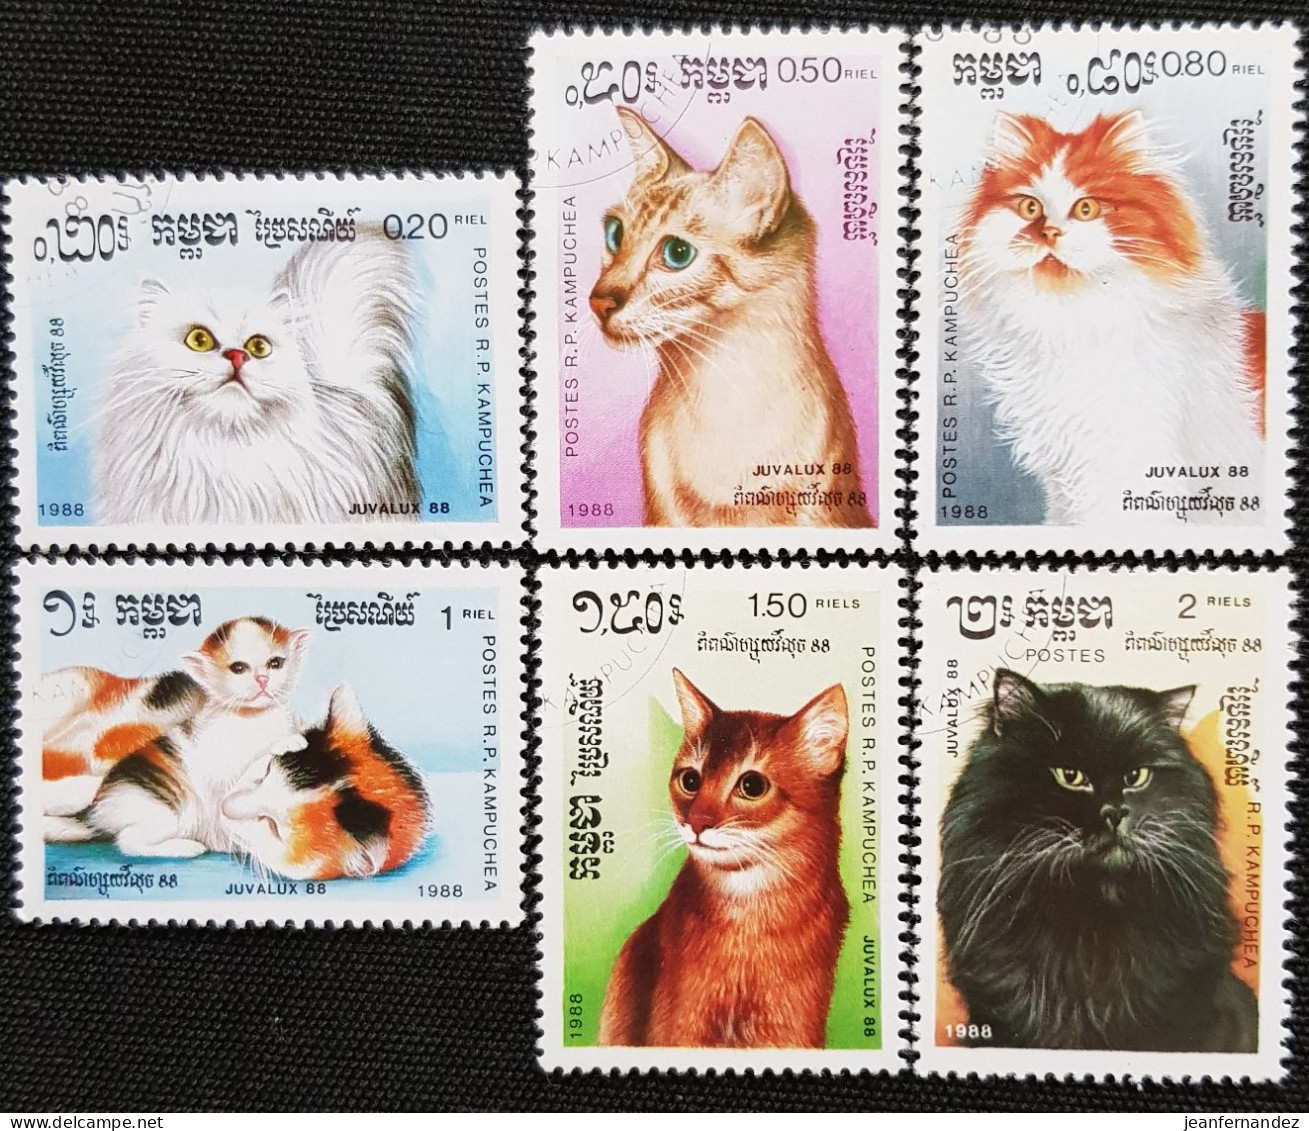 Cambodge 1988 International Stamp Exhibition "Juvalux '88" - Luxembourg, Europe - Cats   Stampworld N° 949 à 954 - Kambodscha